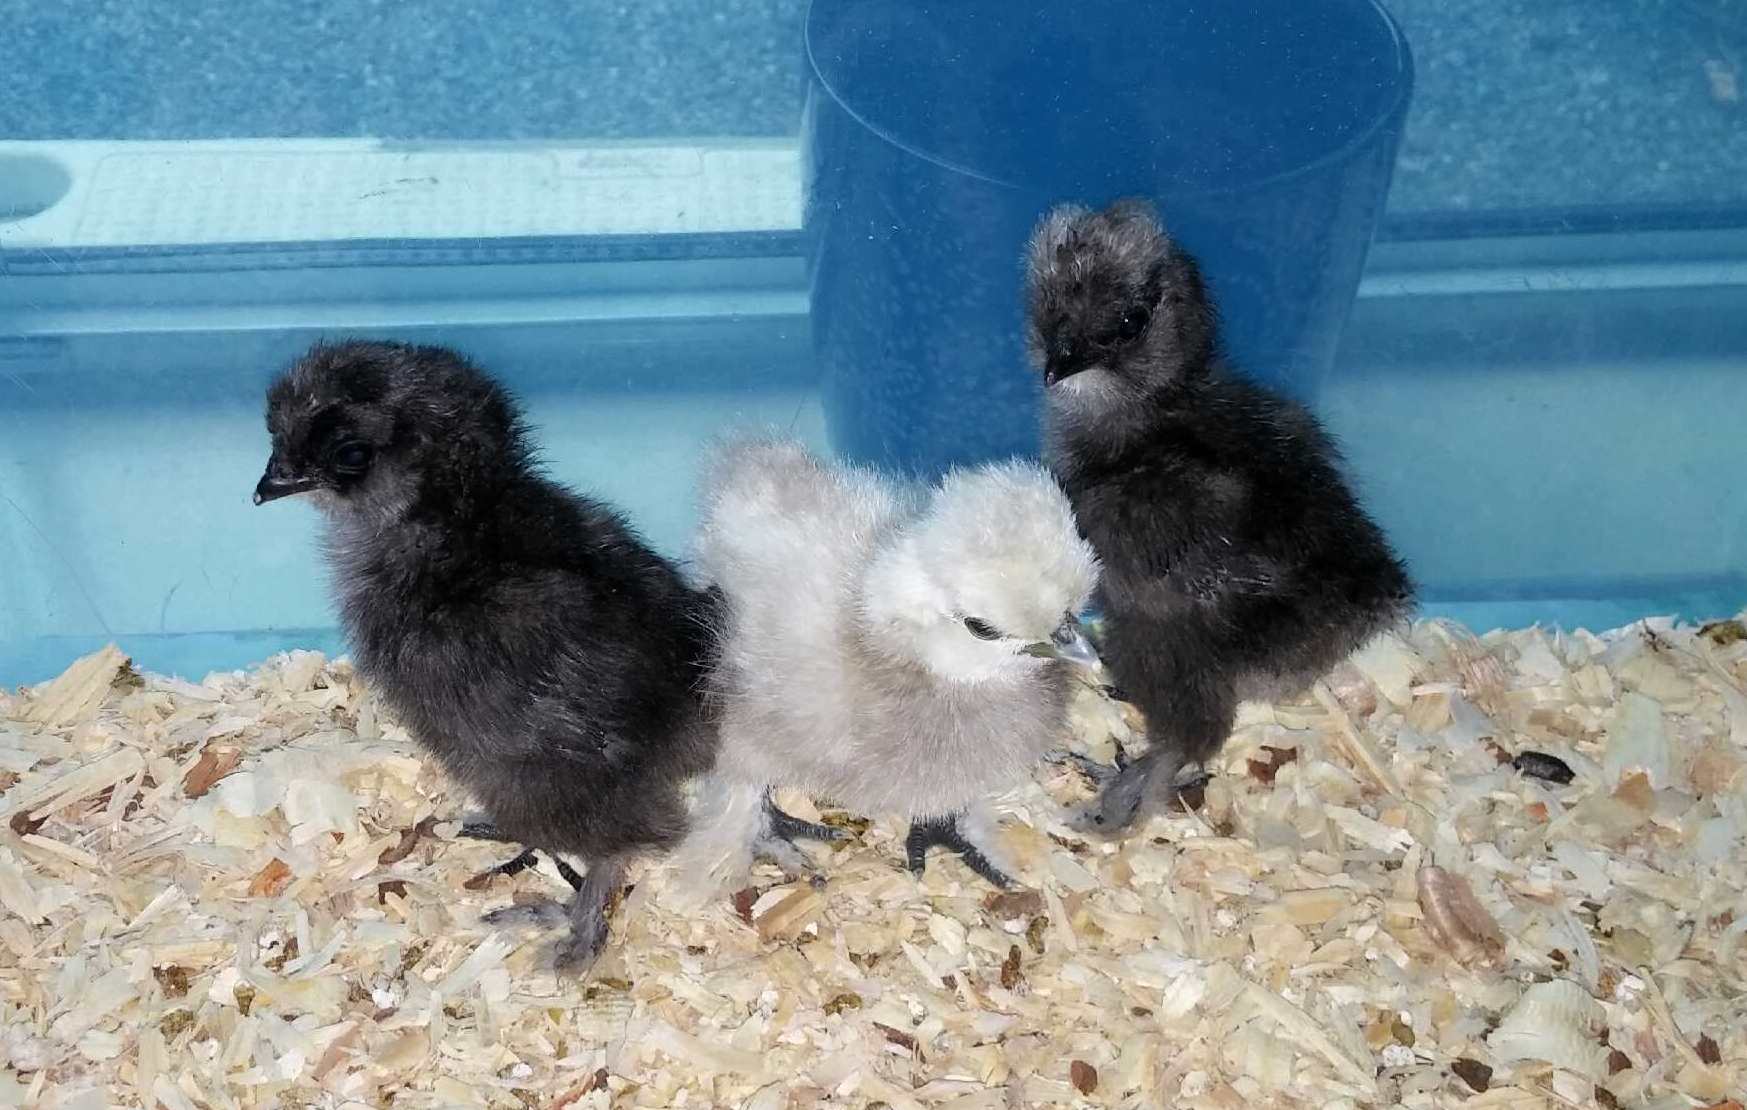 Another picture of "Coconut", "Buffett", and "Margarita"...at 5 days old...